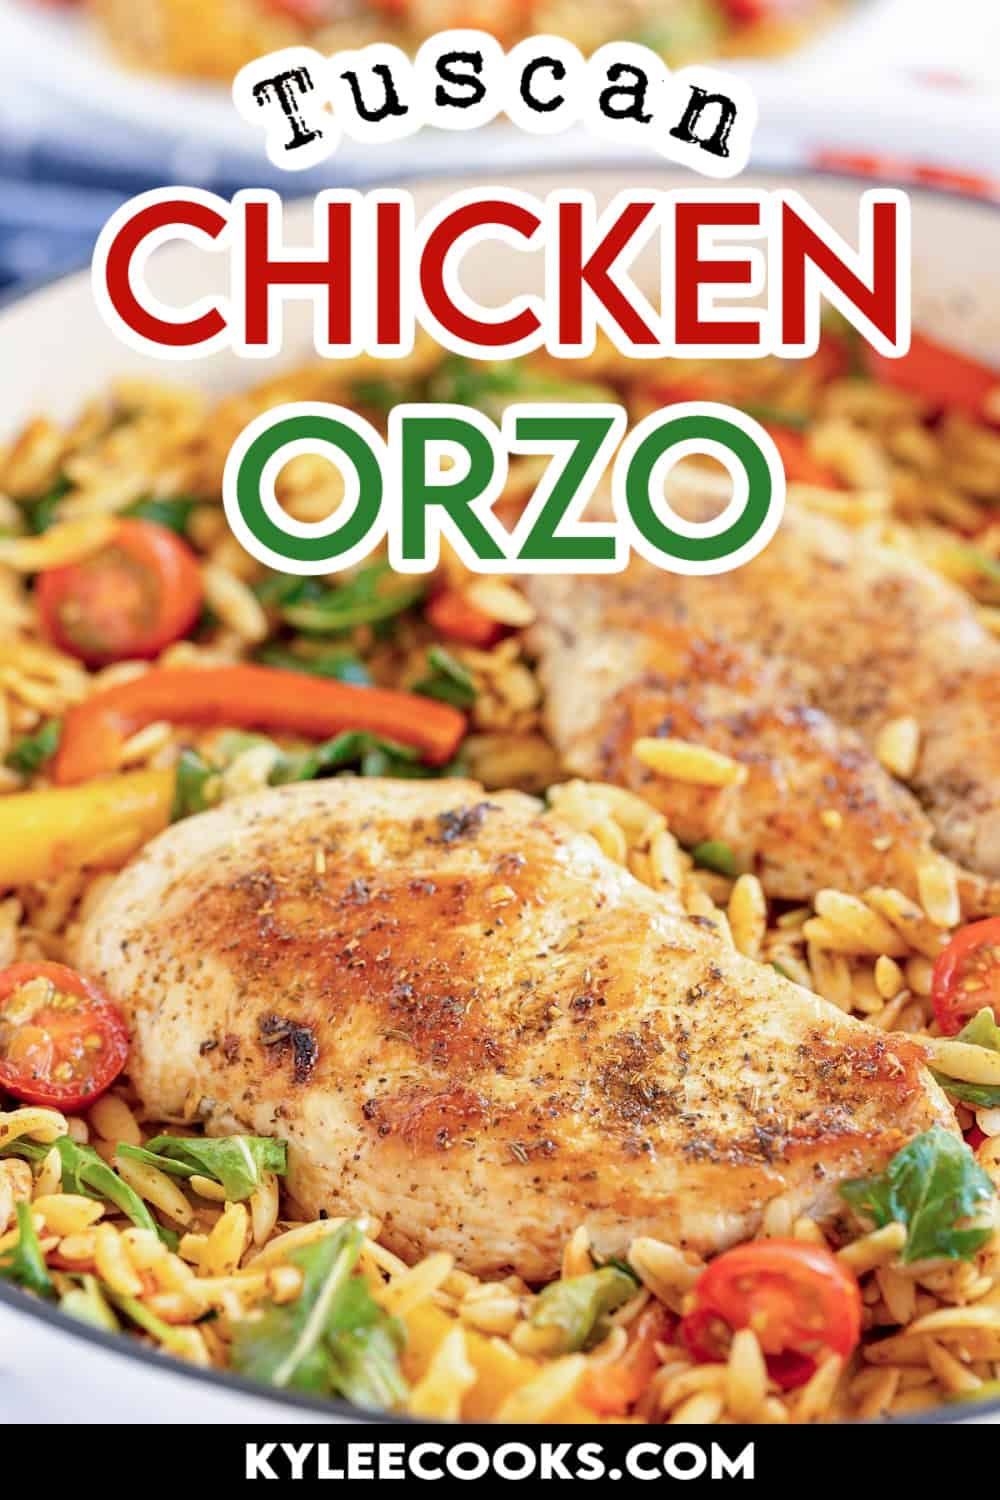 cooked chicken breasts in a skillet with orzo, with recipe name and ingredients overlaid in text.